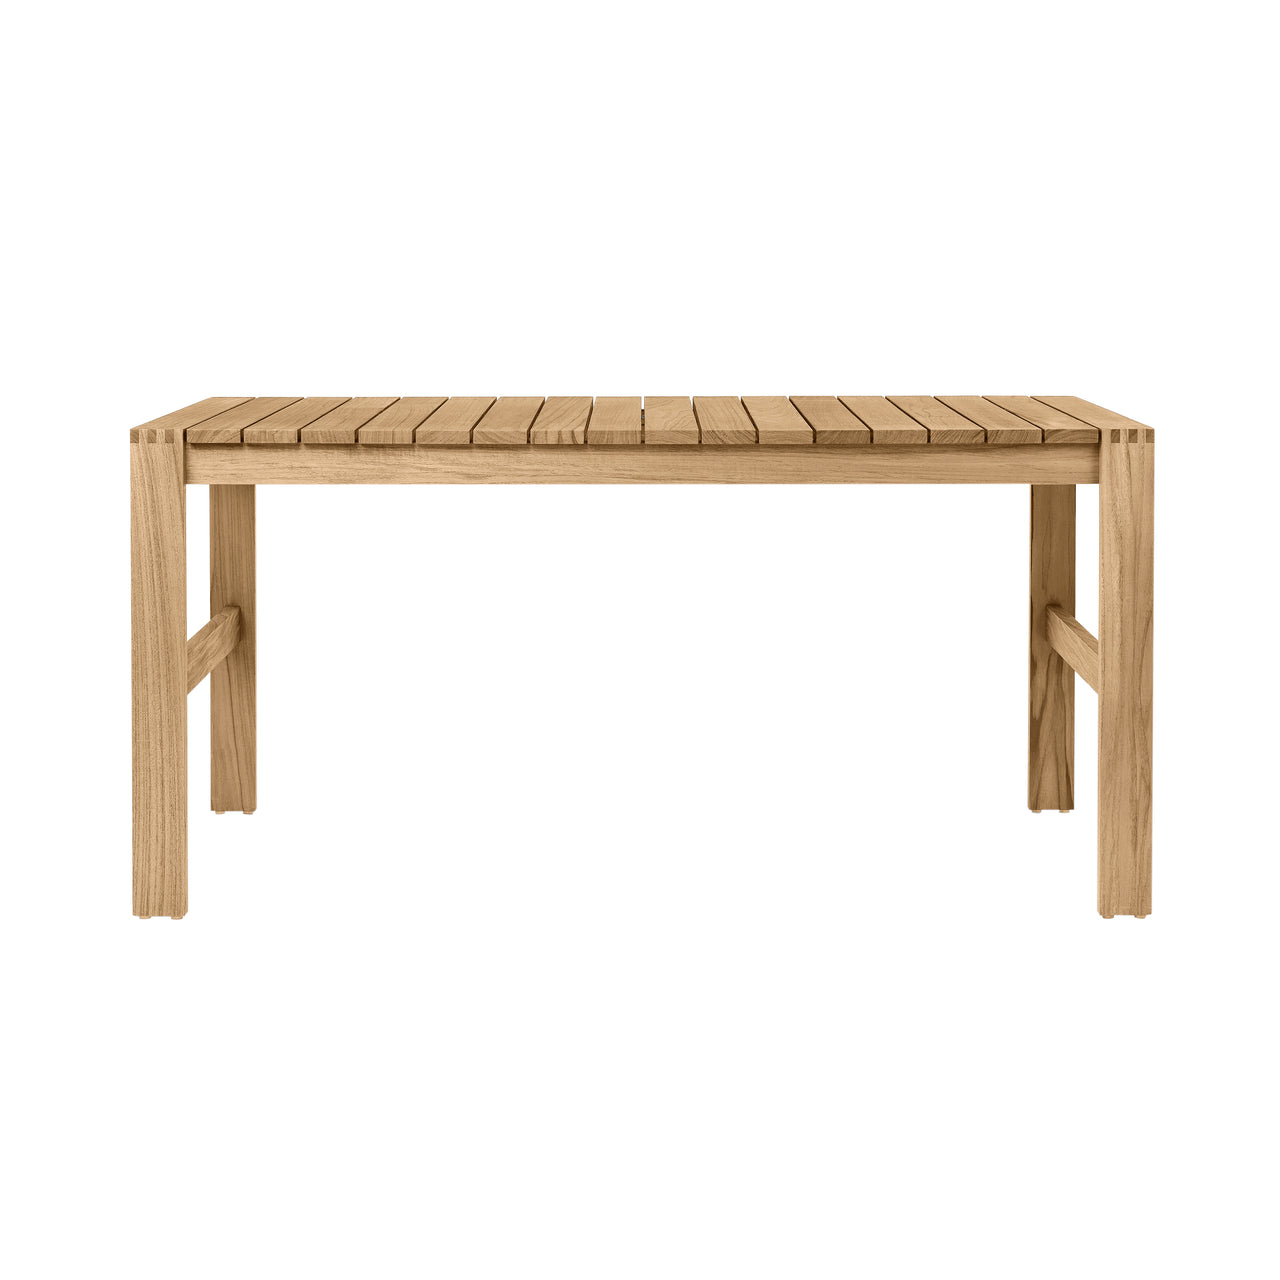 BK15 Outdoor Dining Table